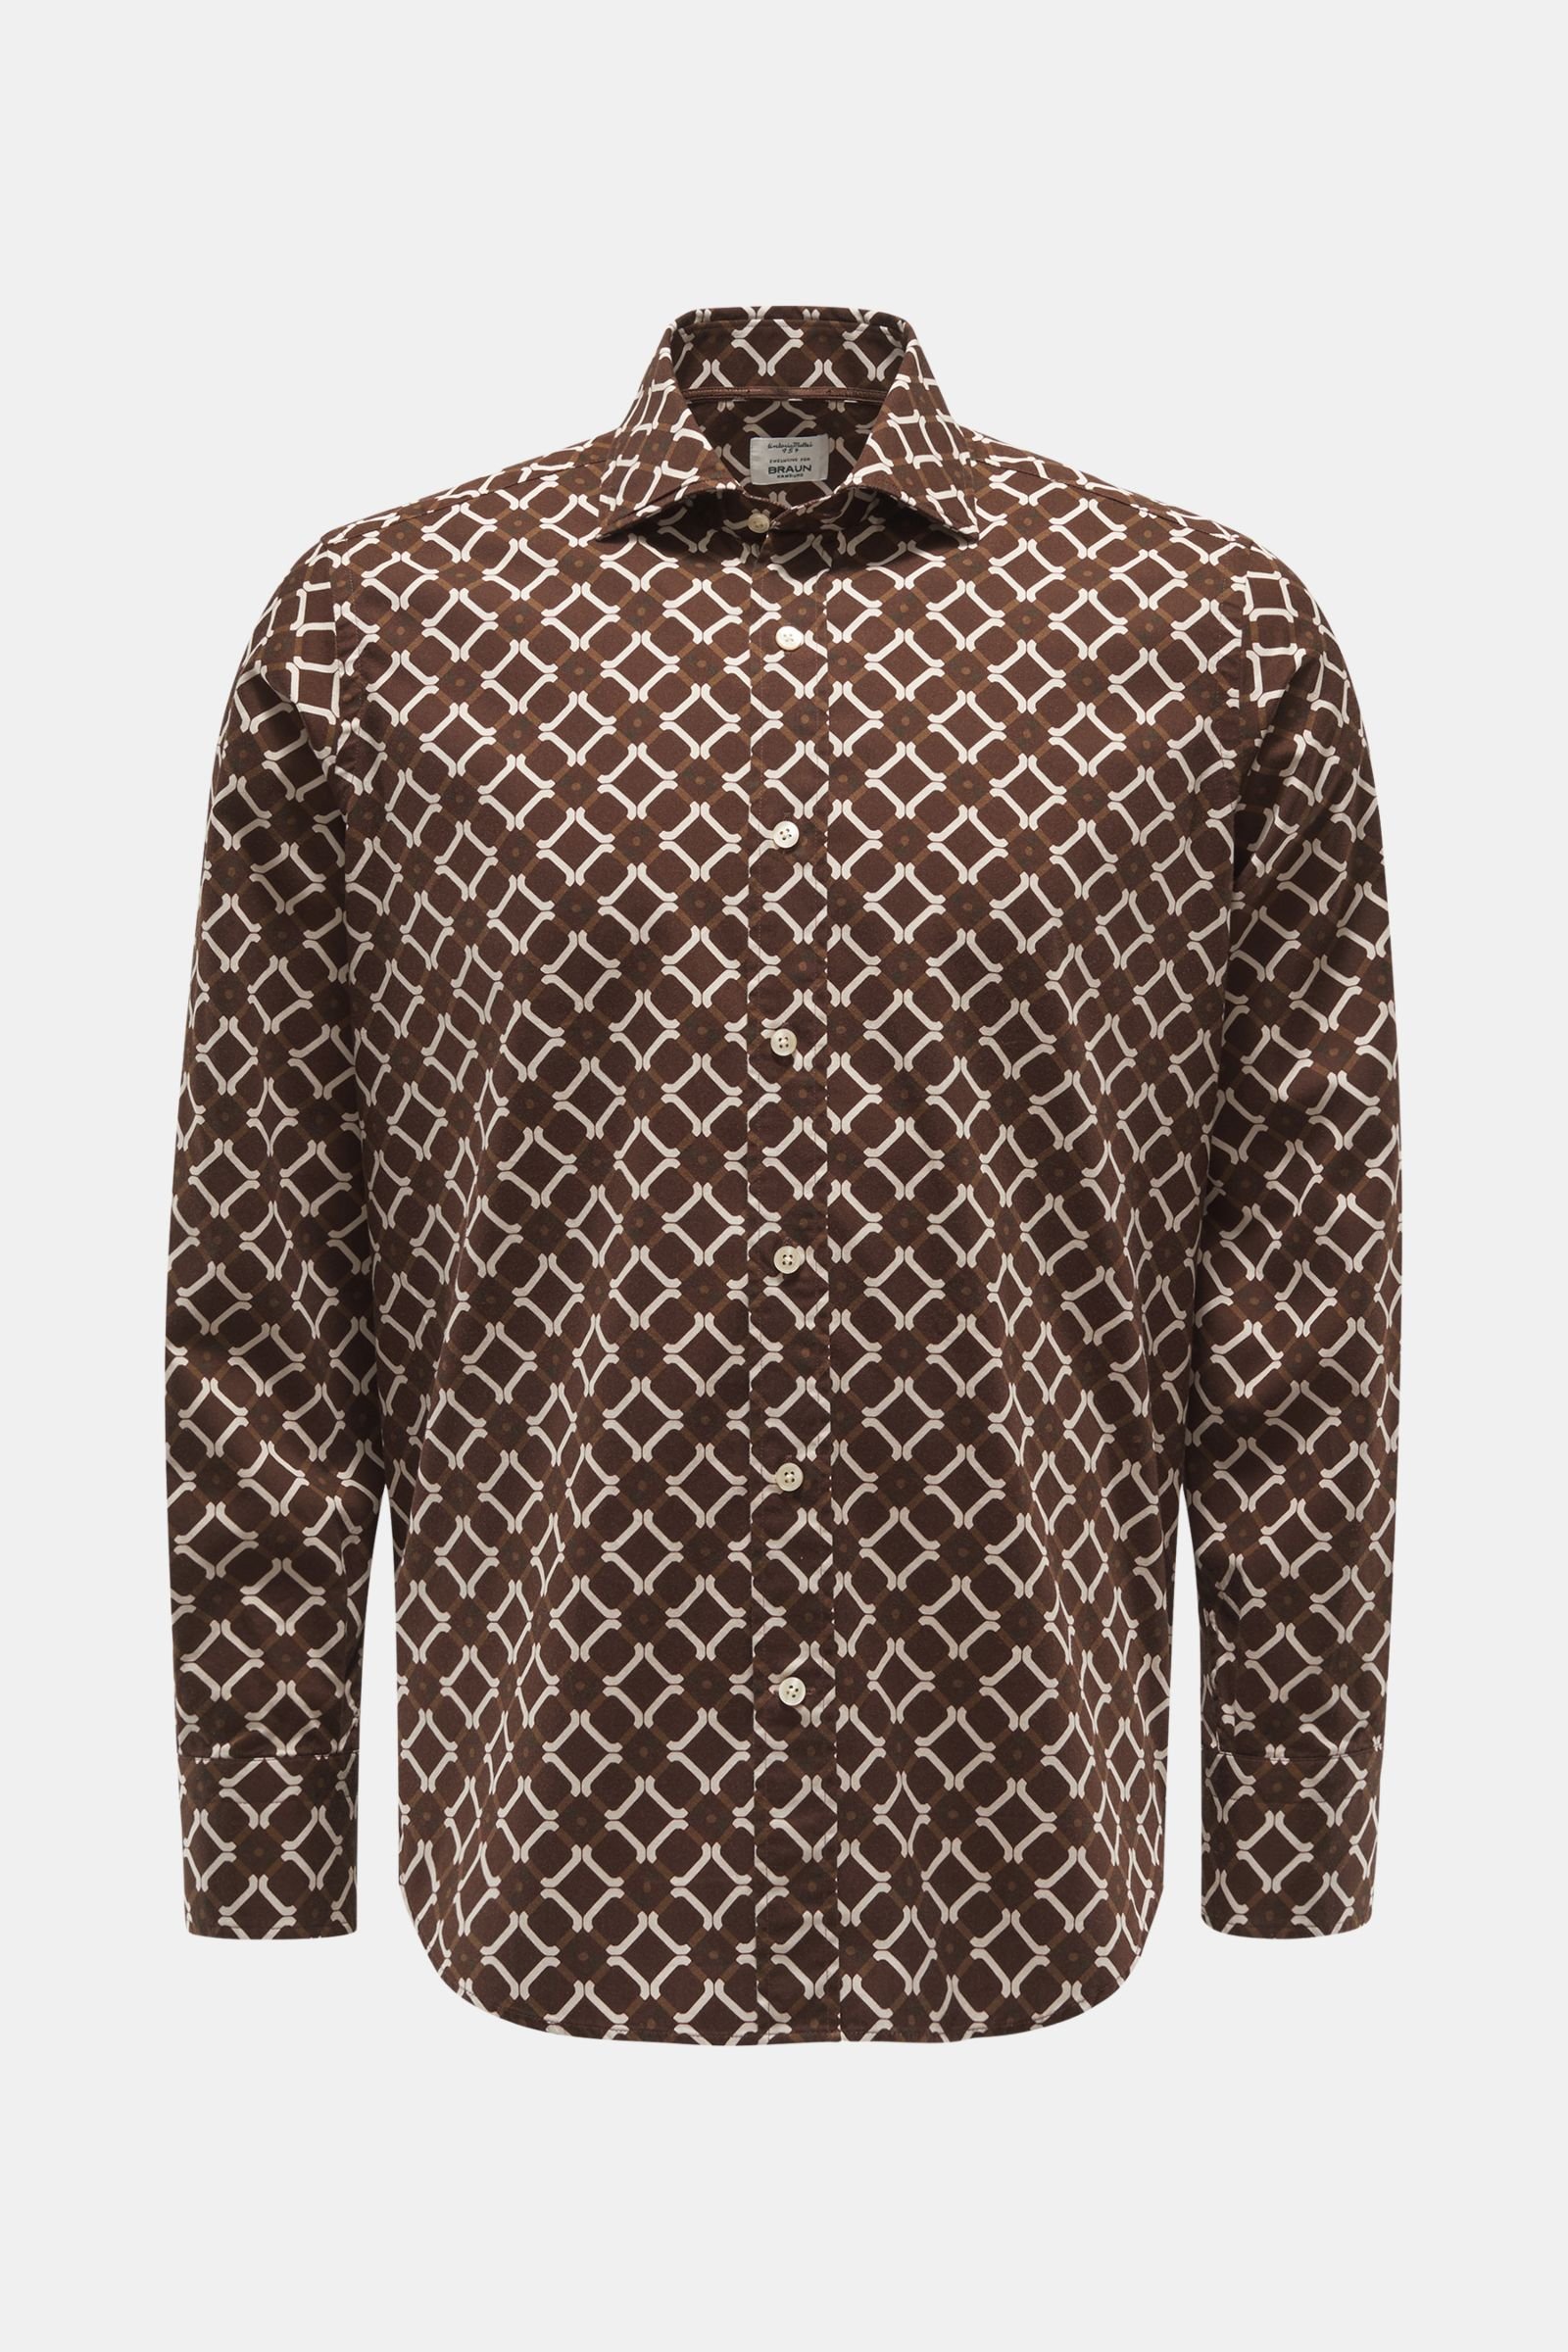 Casual shirt shark collar dark brown/off-white patterned